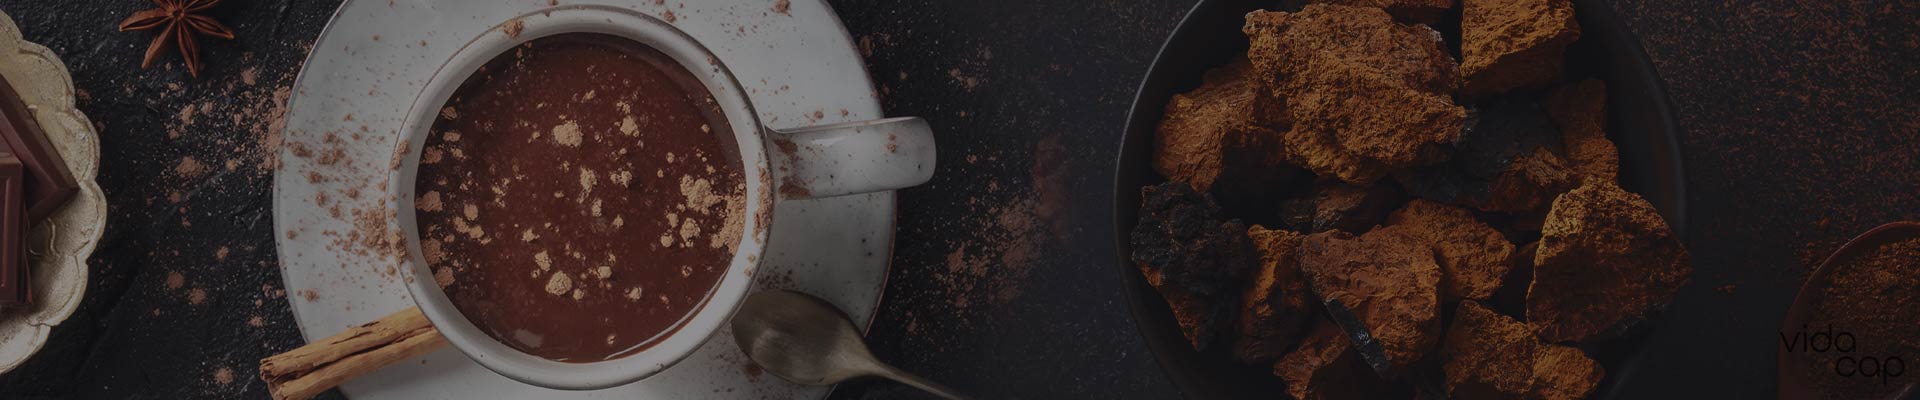 banner-hot_chocolate_with_mushrooms_recipe